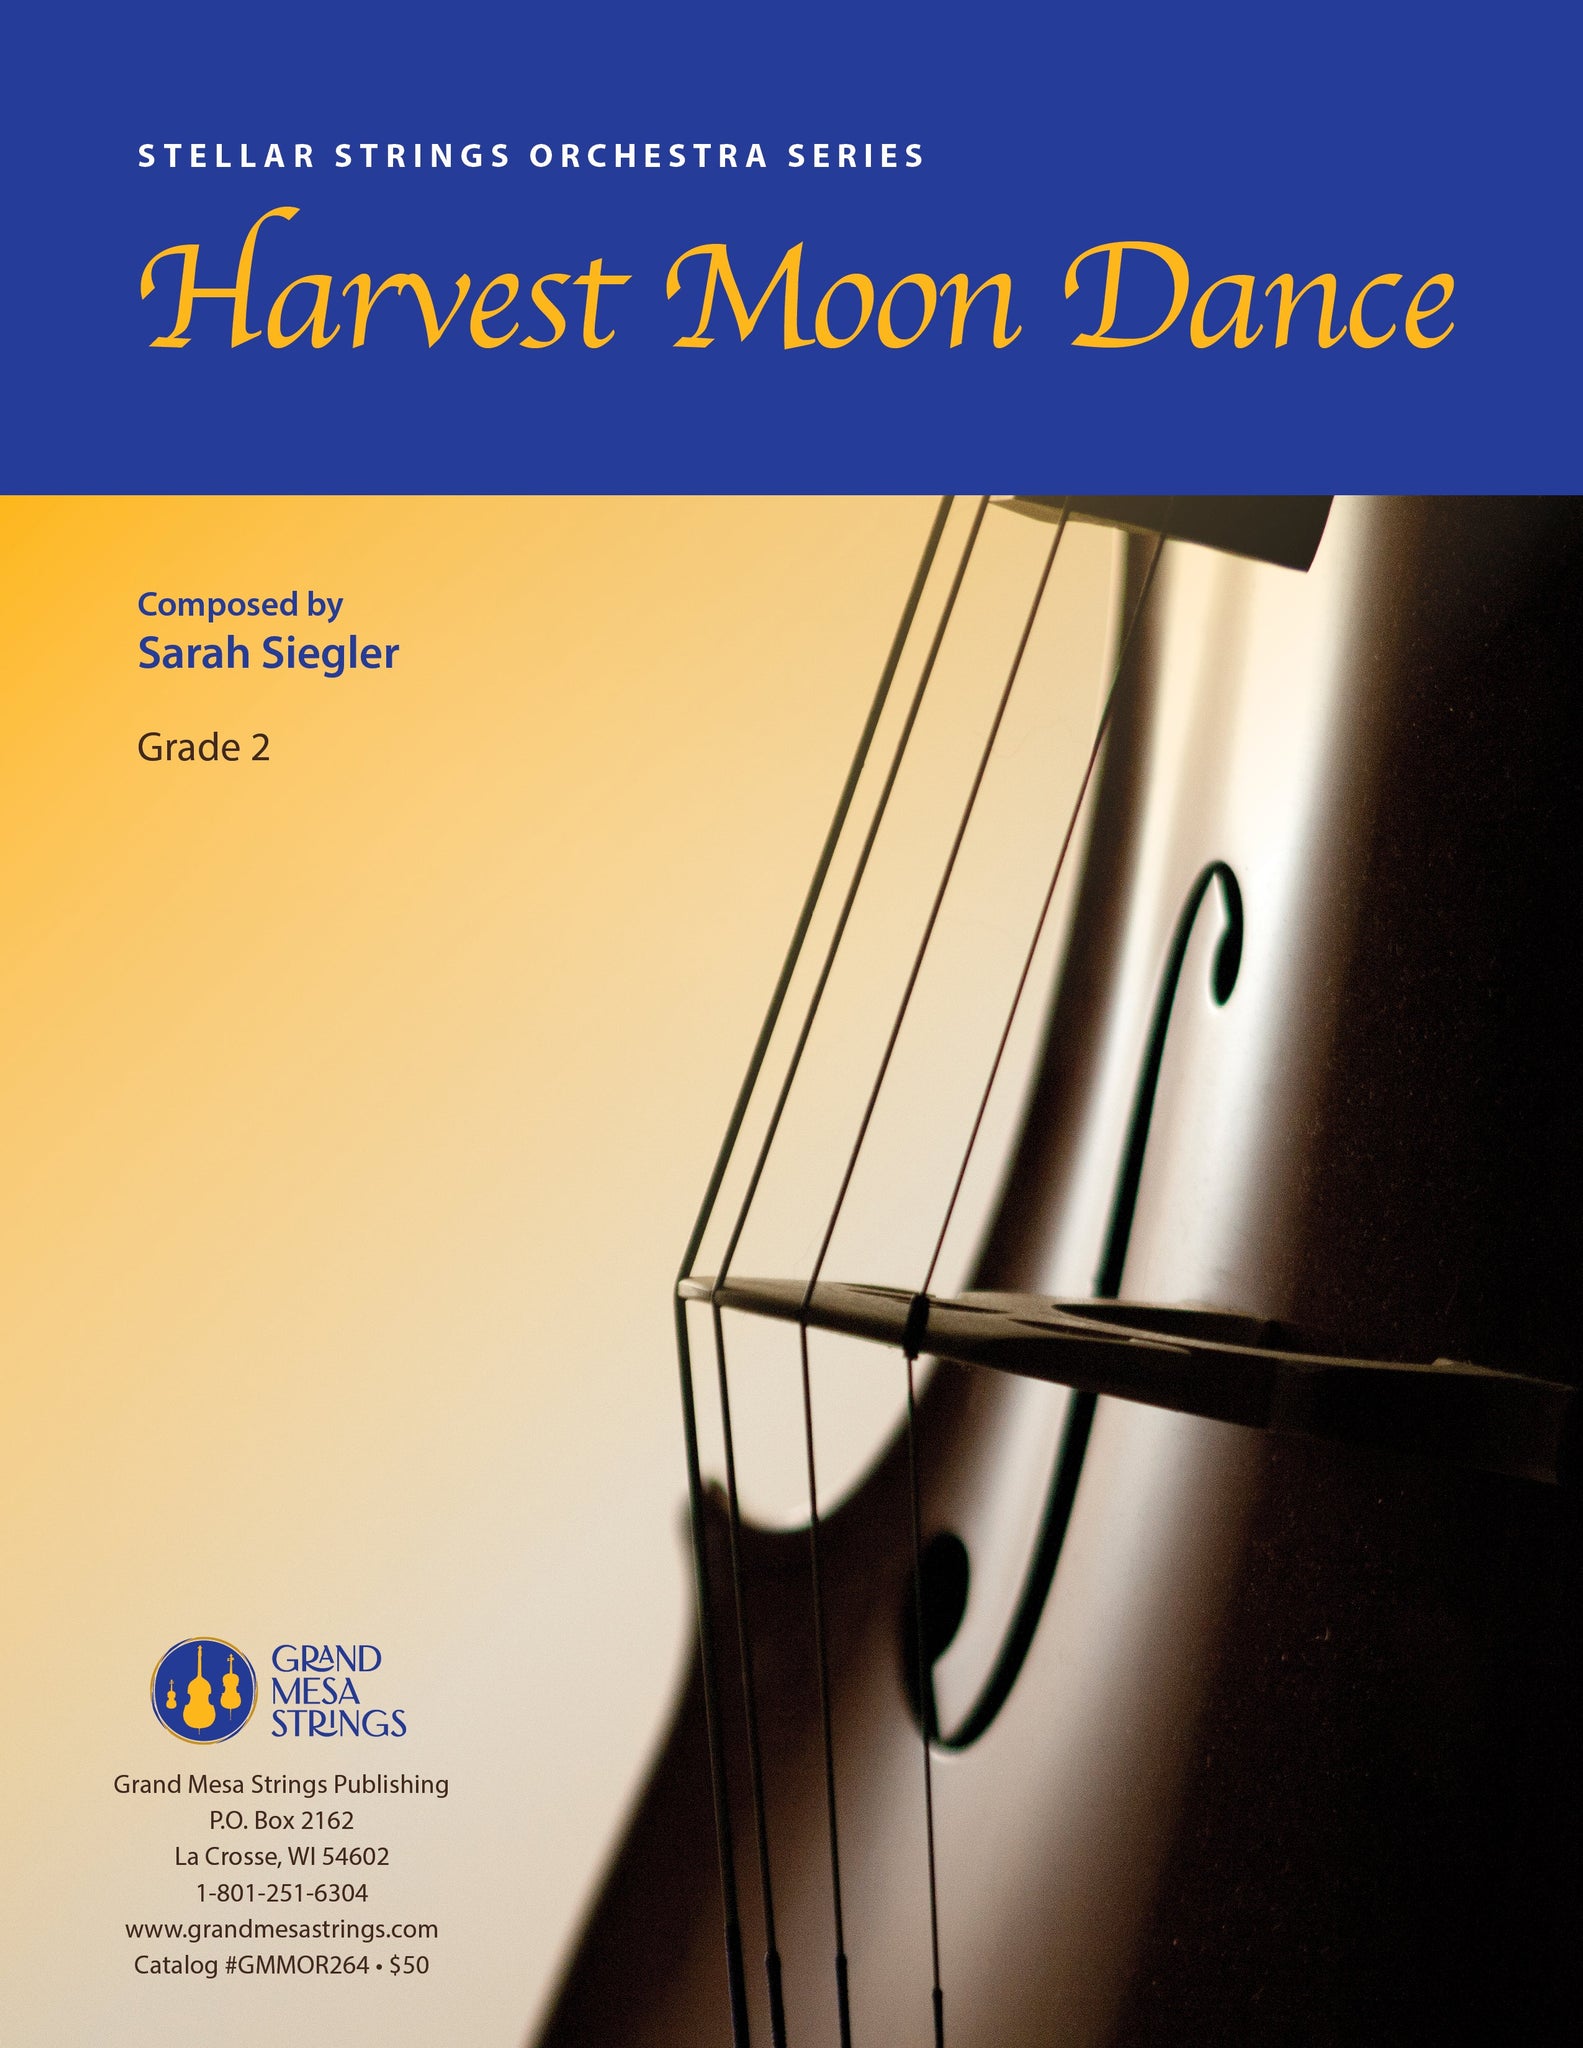 Strings sheet music cover of Harvest Moon Dance, composed by Sarah Siegler.